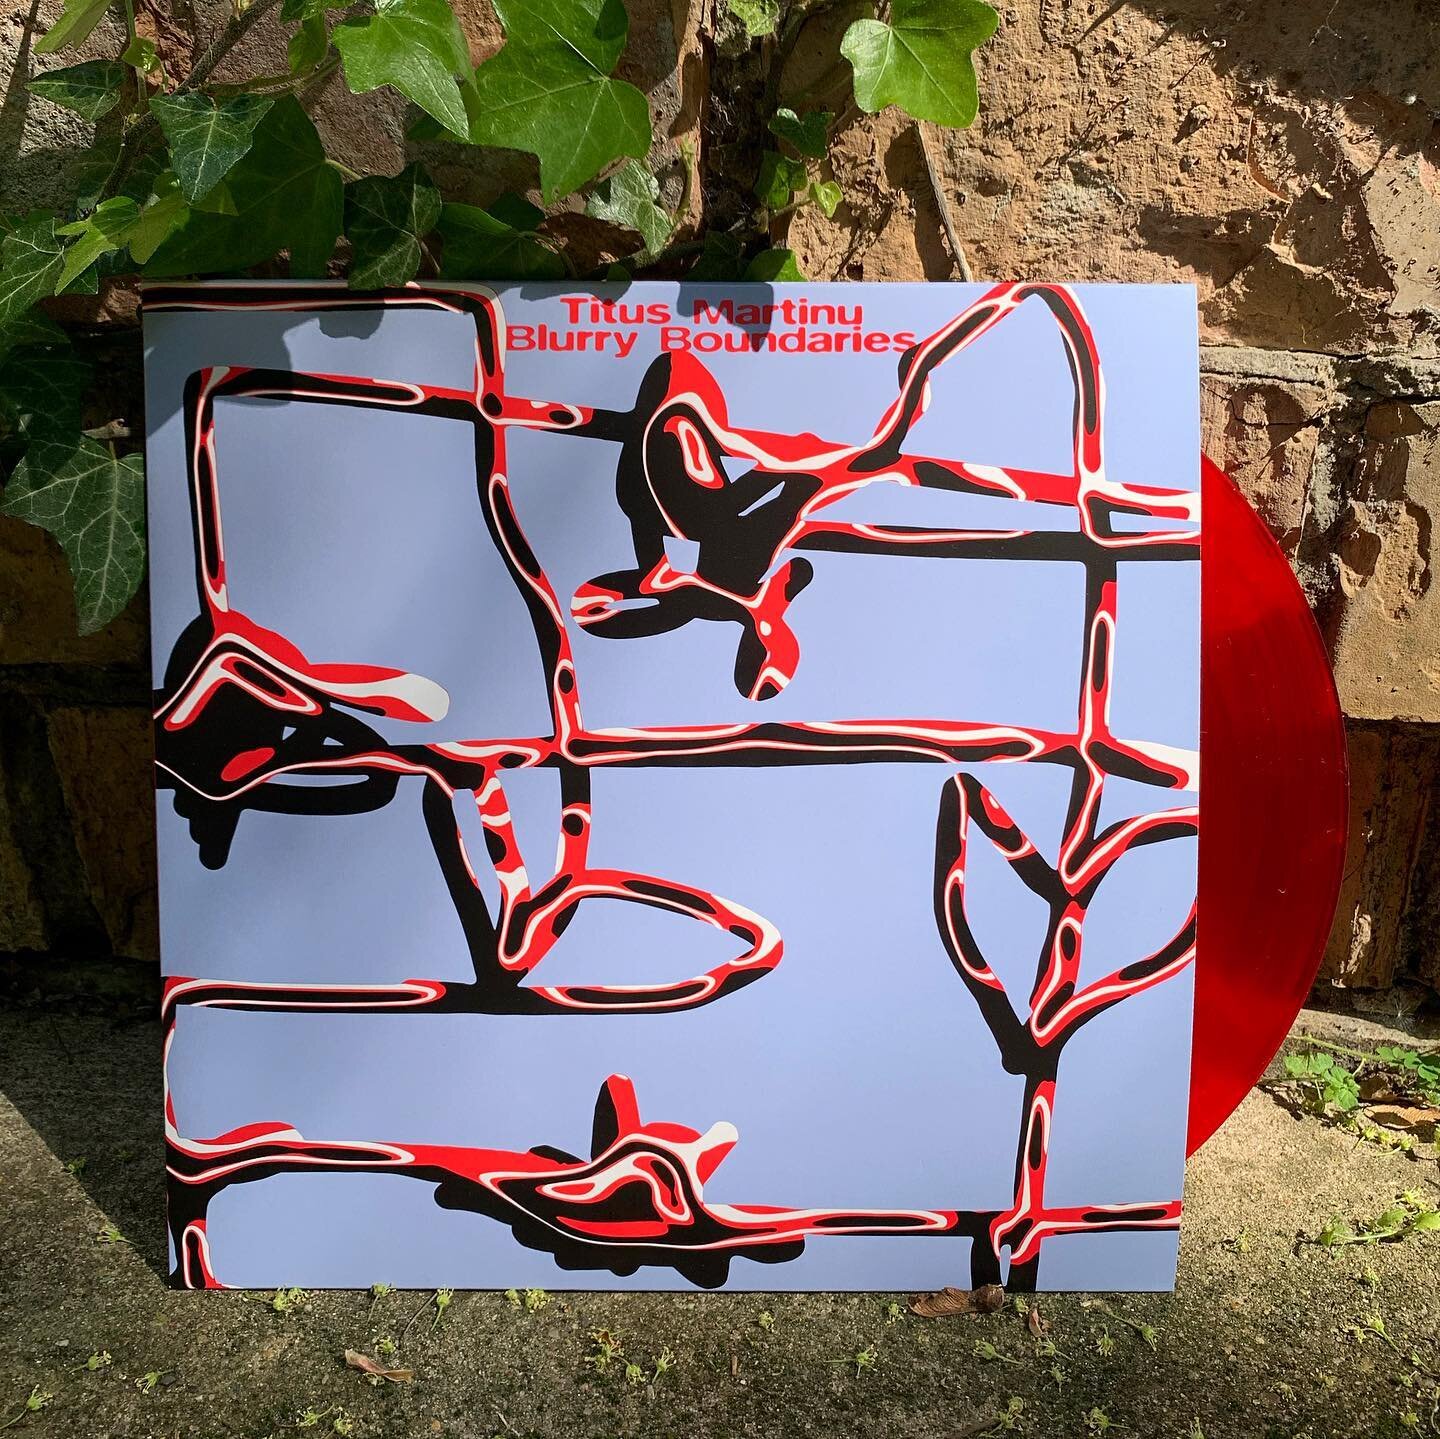 Look what just arrived! 🚀 &bdquo;Blurry Boundaries&ldquo; (BLOCK010) by @titus_martinu - in all its colorful elegance. Special thanks to @bareis.nicolaus for another exquisite addition to our vinyl catalogue. Limited to 200 copies, treat yourself! ?